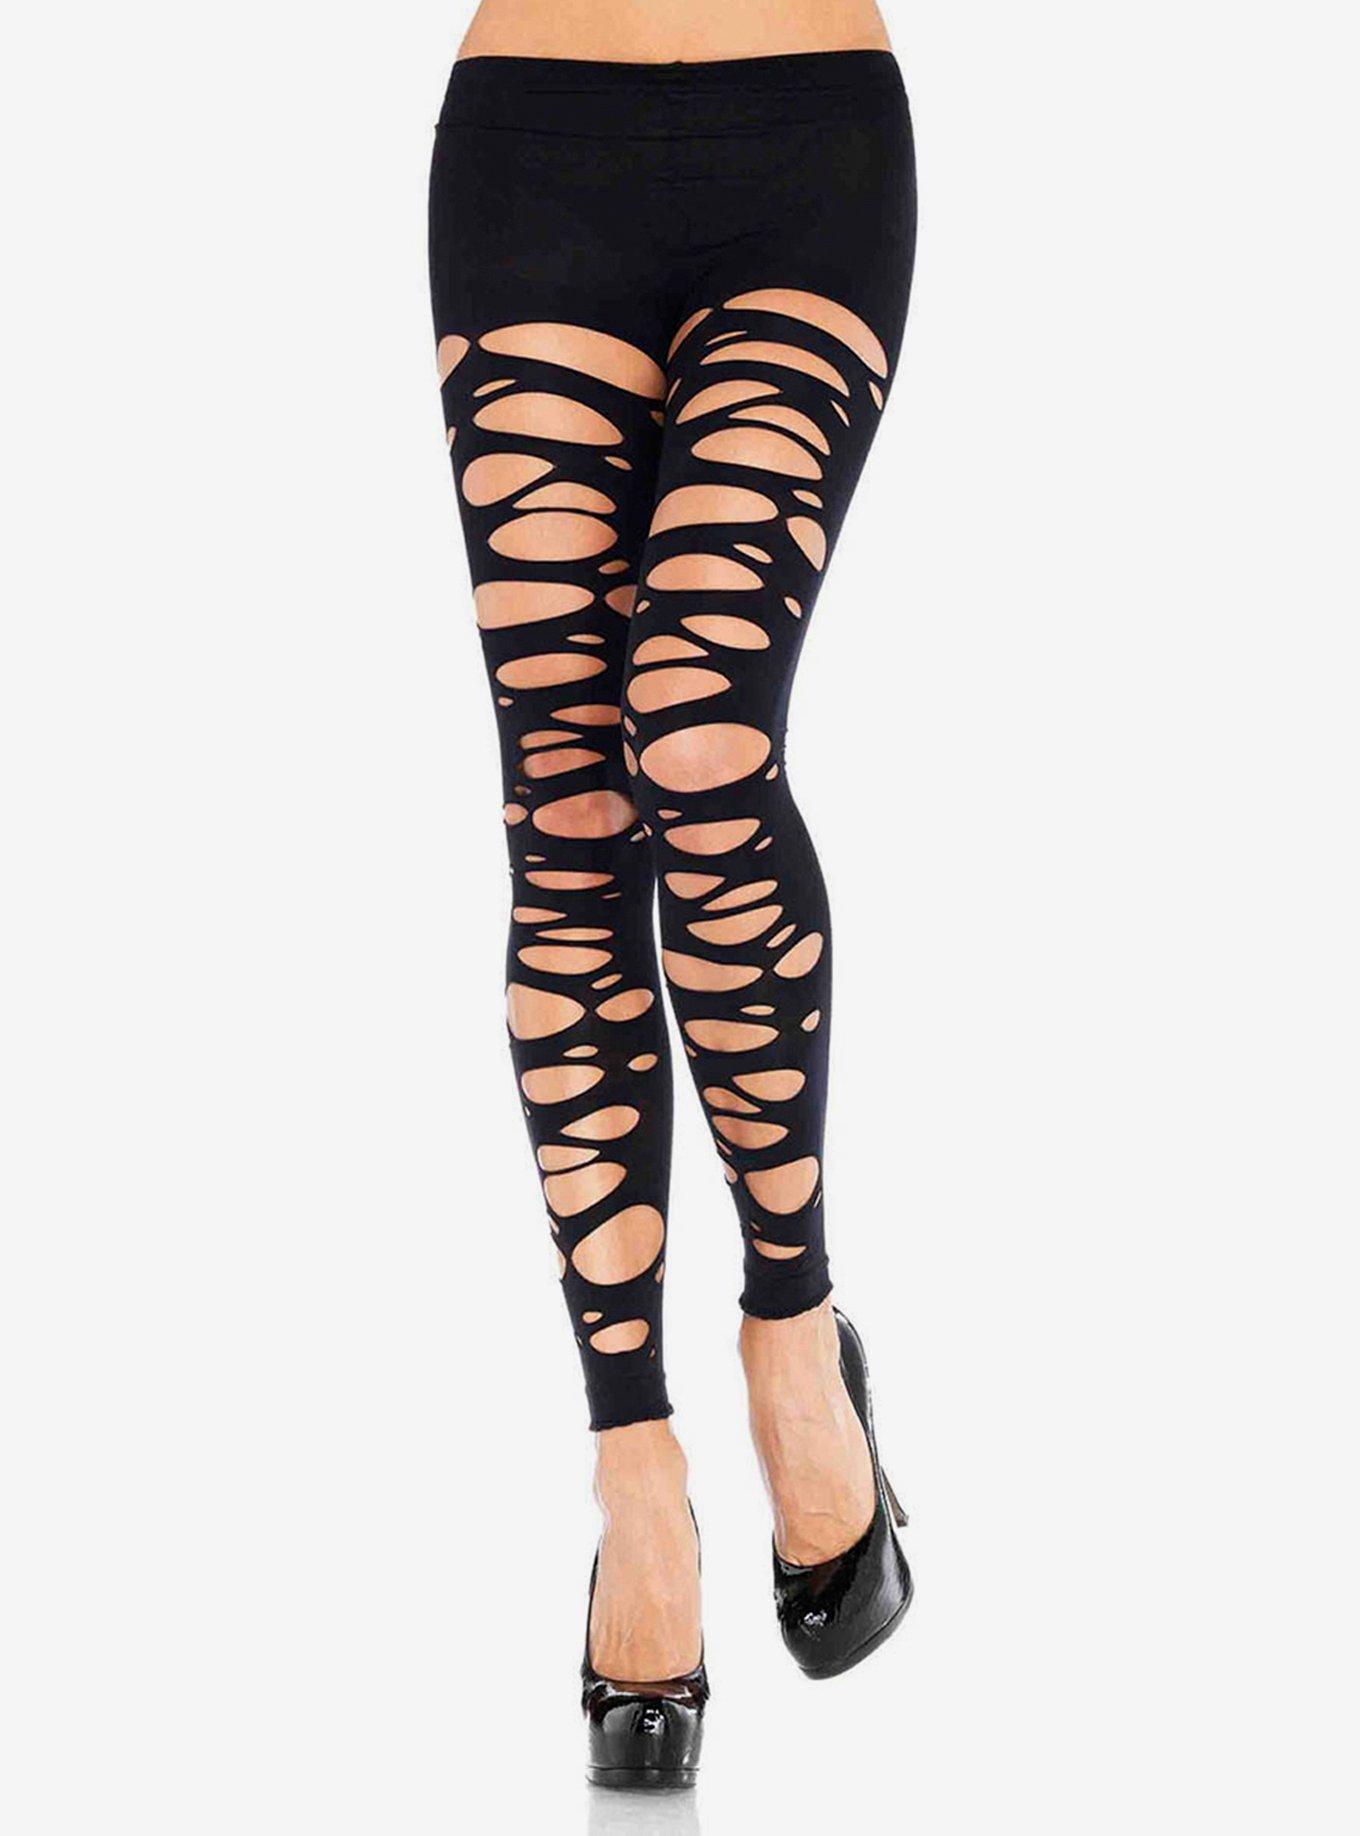 Tattered Footless Tights